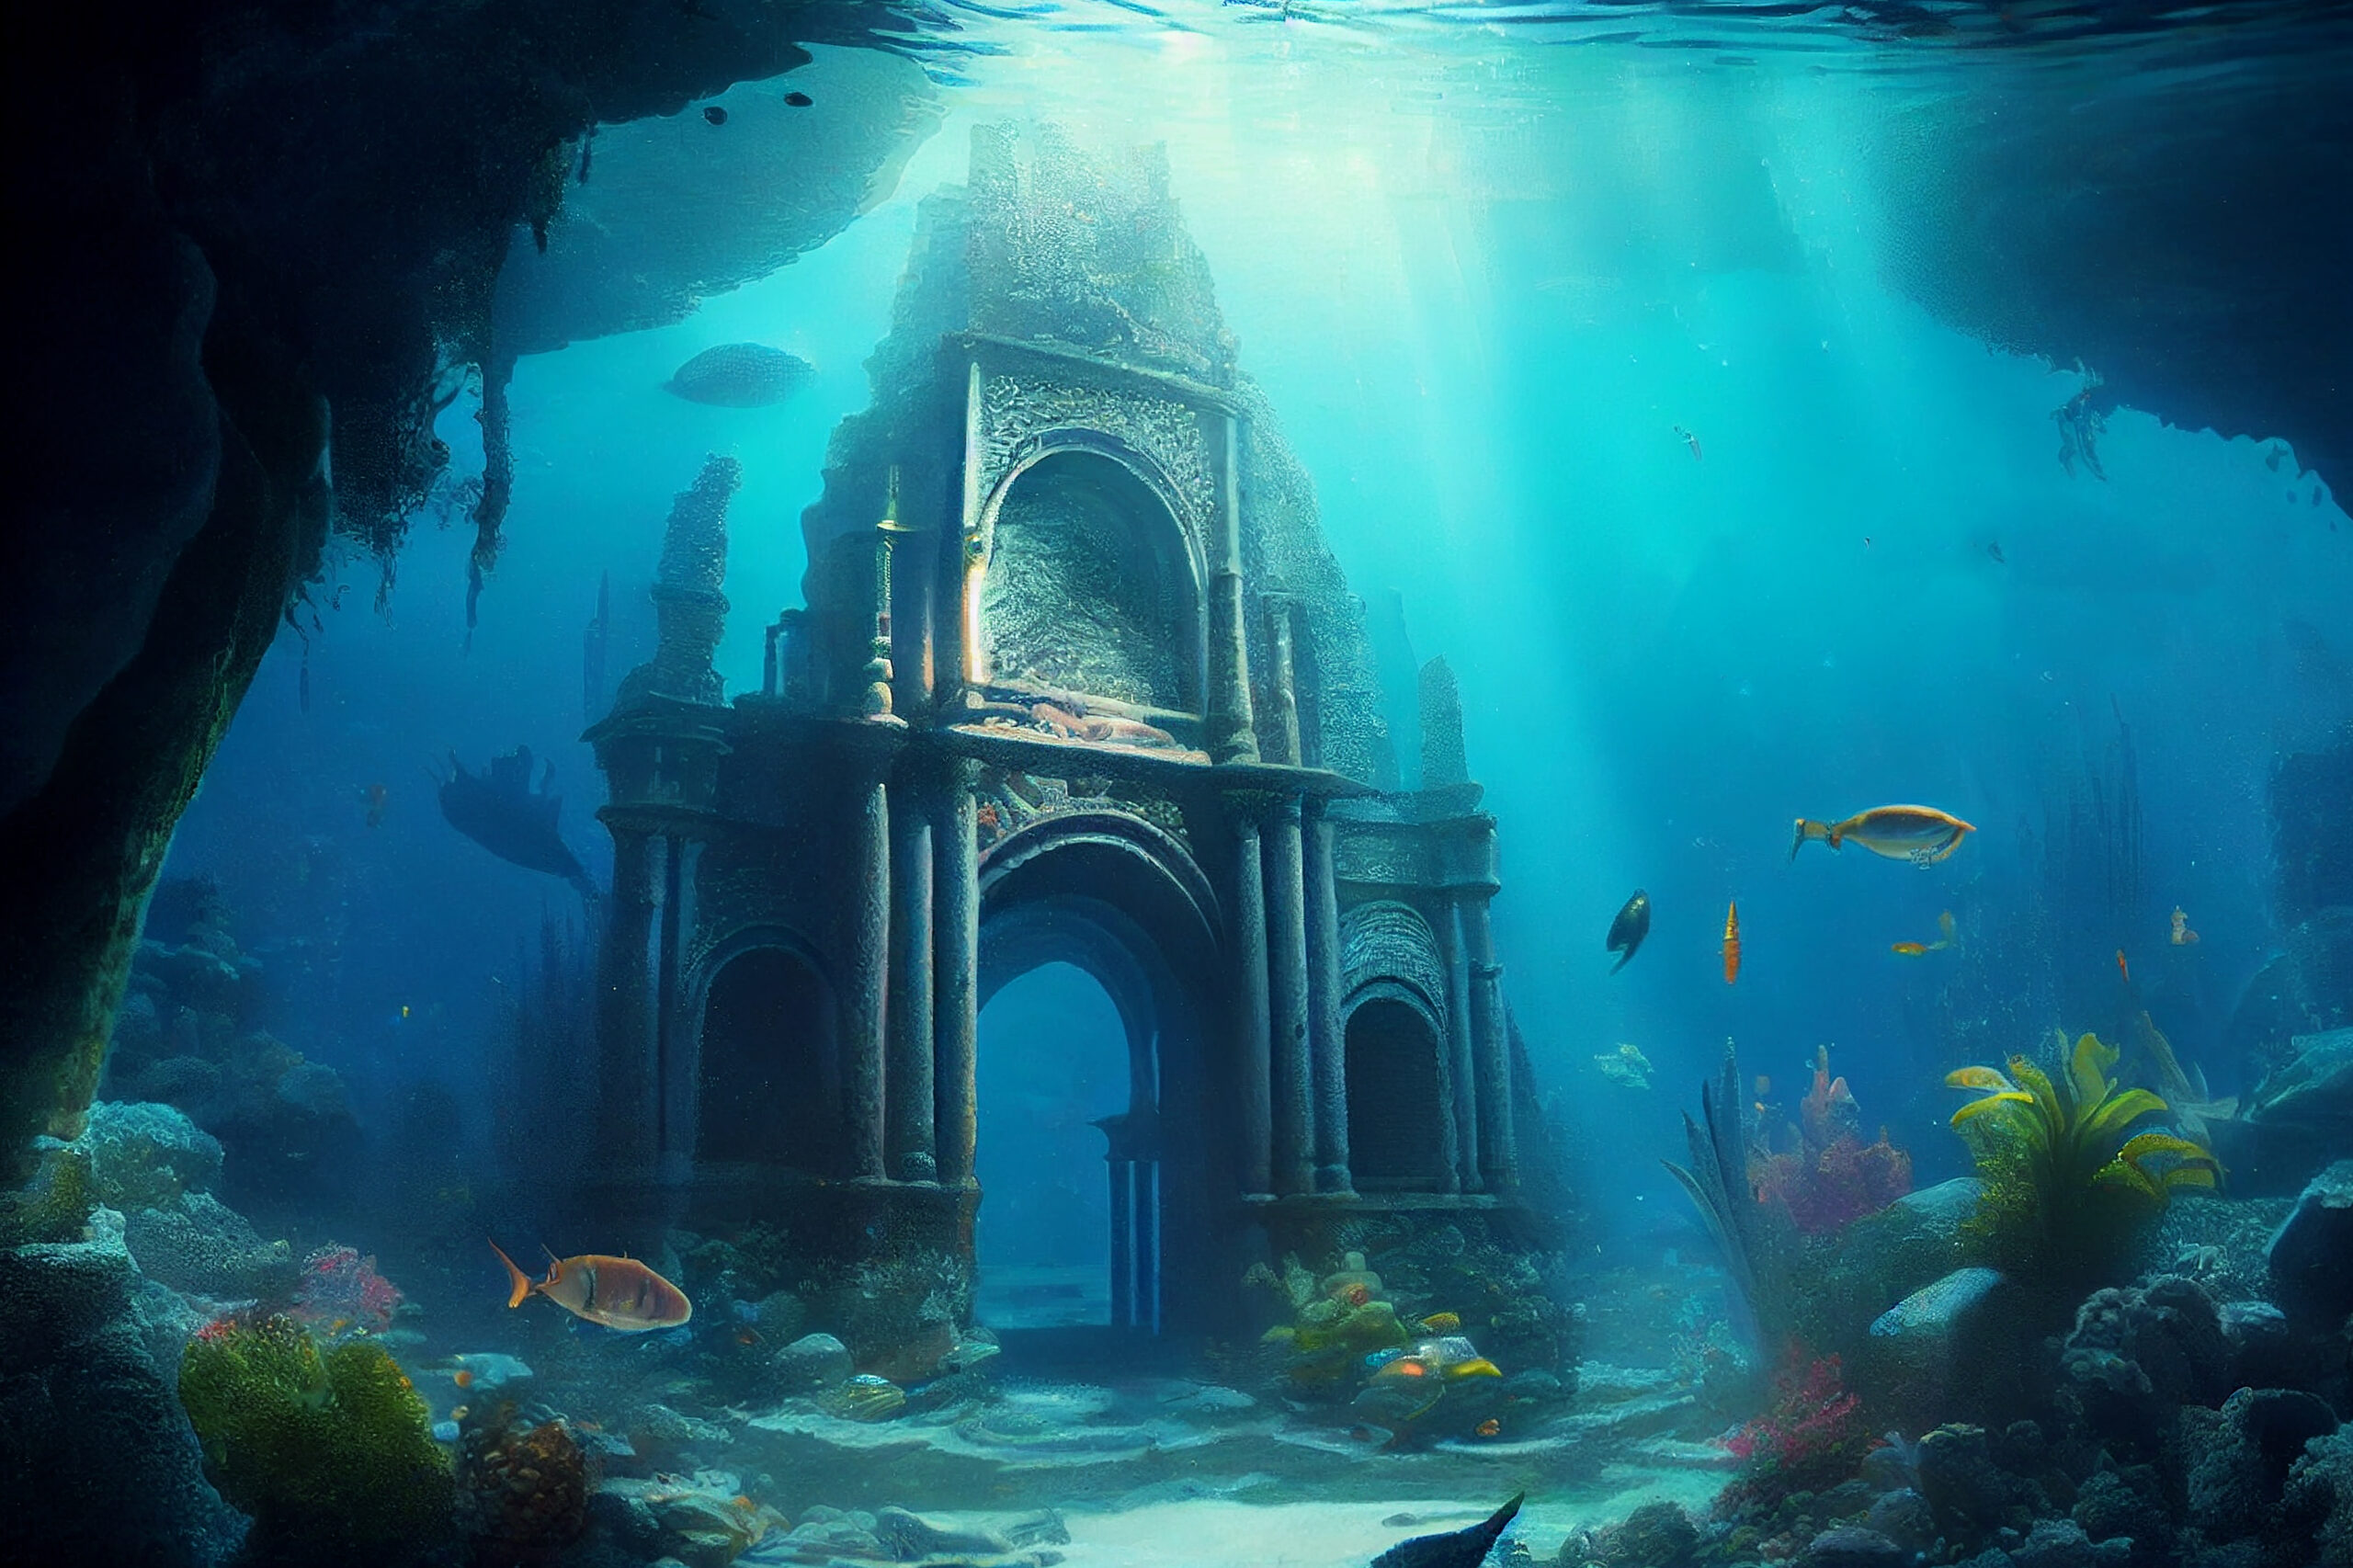 An underwater fantasy scene, showcasing an imaginative and dreamlike world beneath the water's surface, with colorful marine life, corals, and surreal elements.